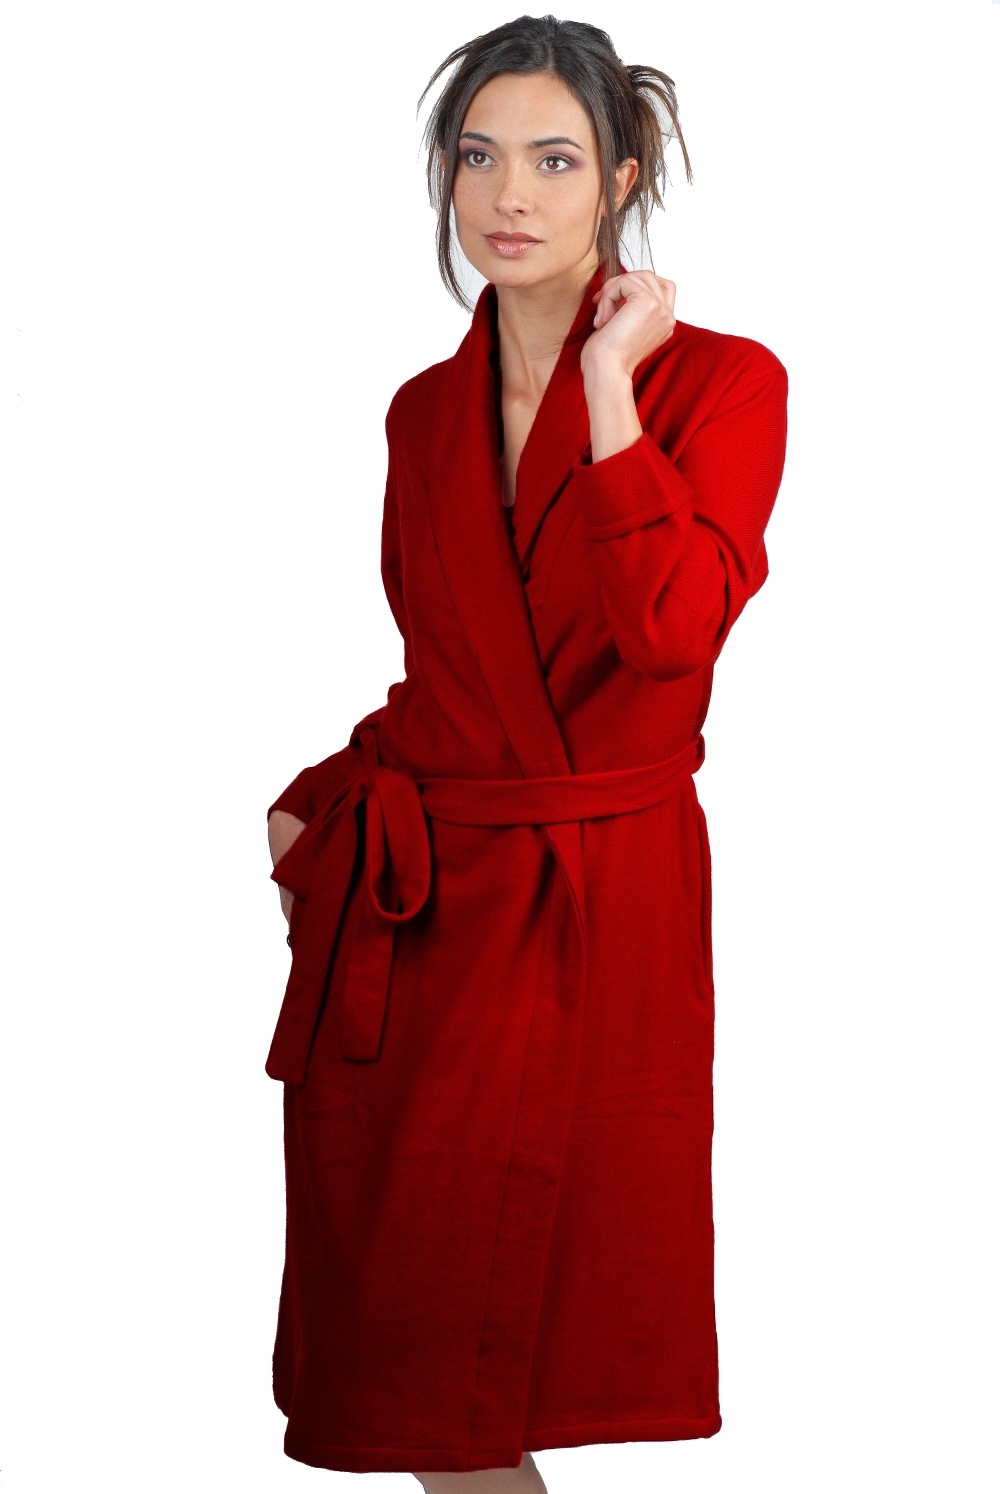 Cashmere accessori cocooning mylady rosso intenso t1